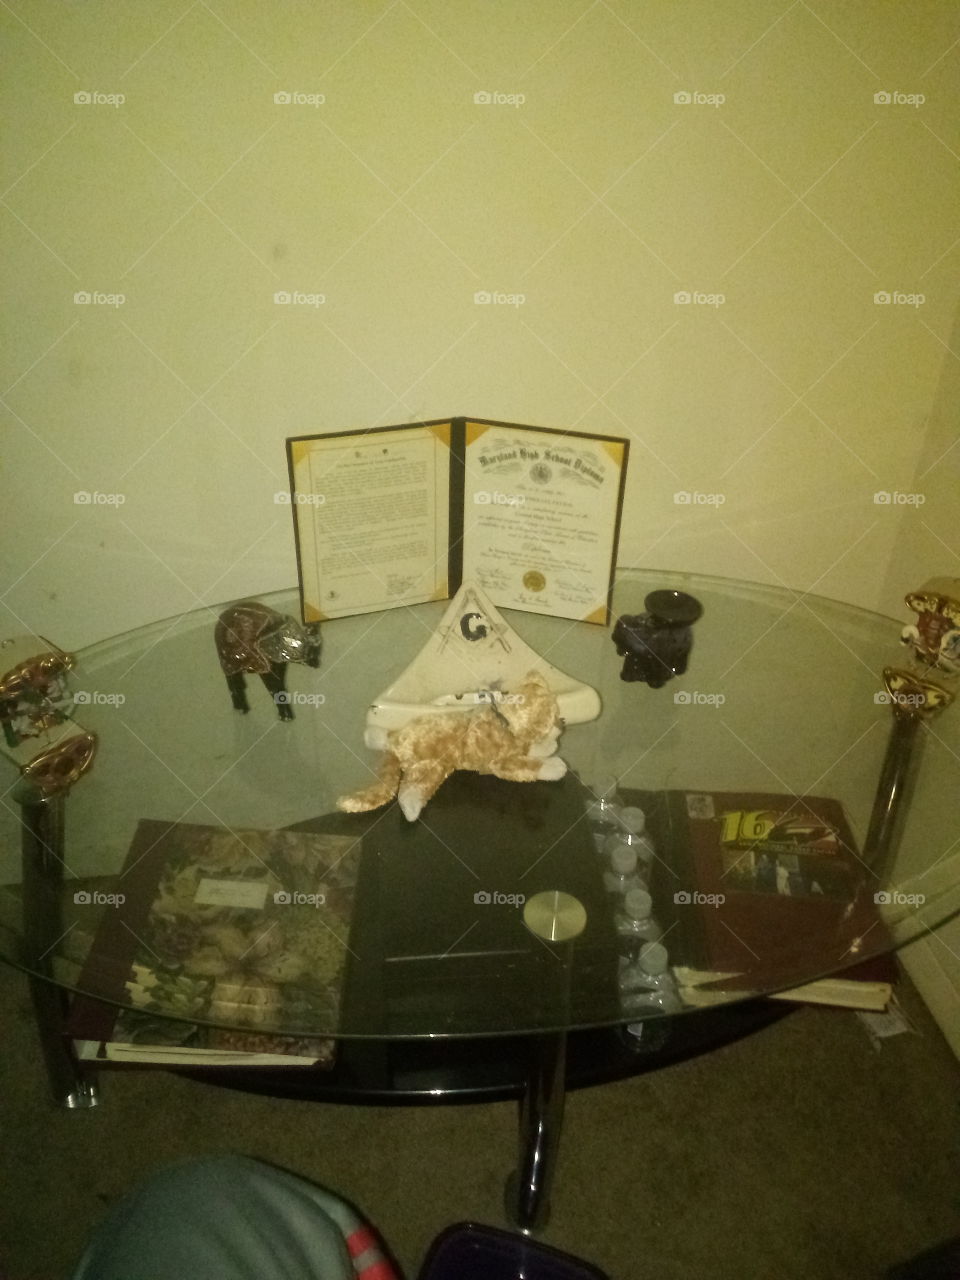 my Highschool diploma and some other personal items